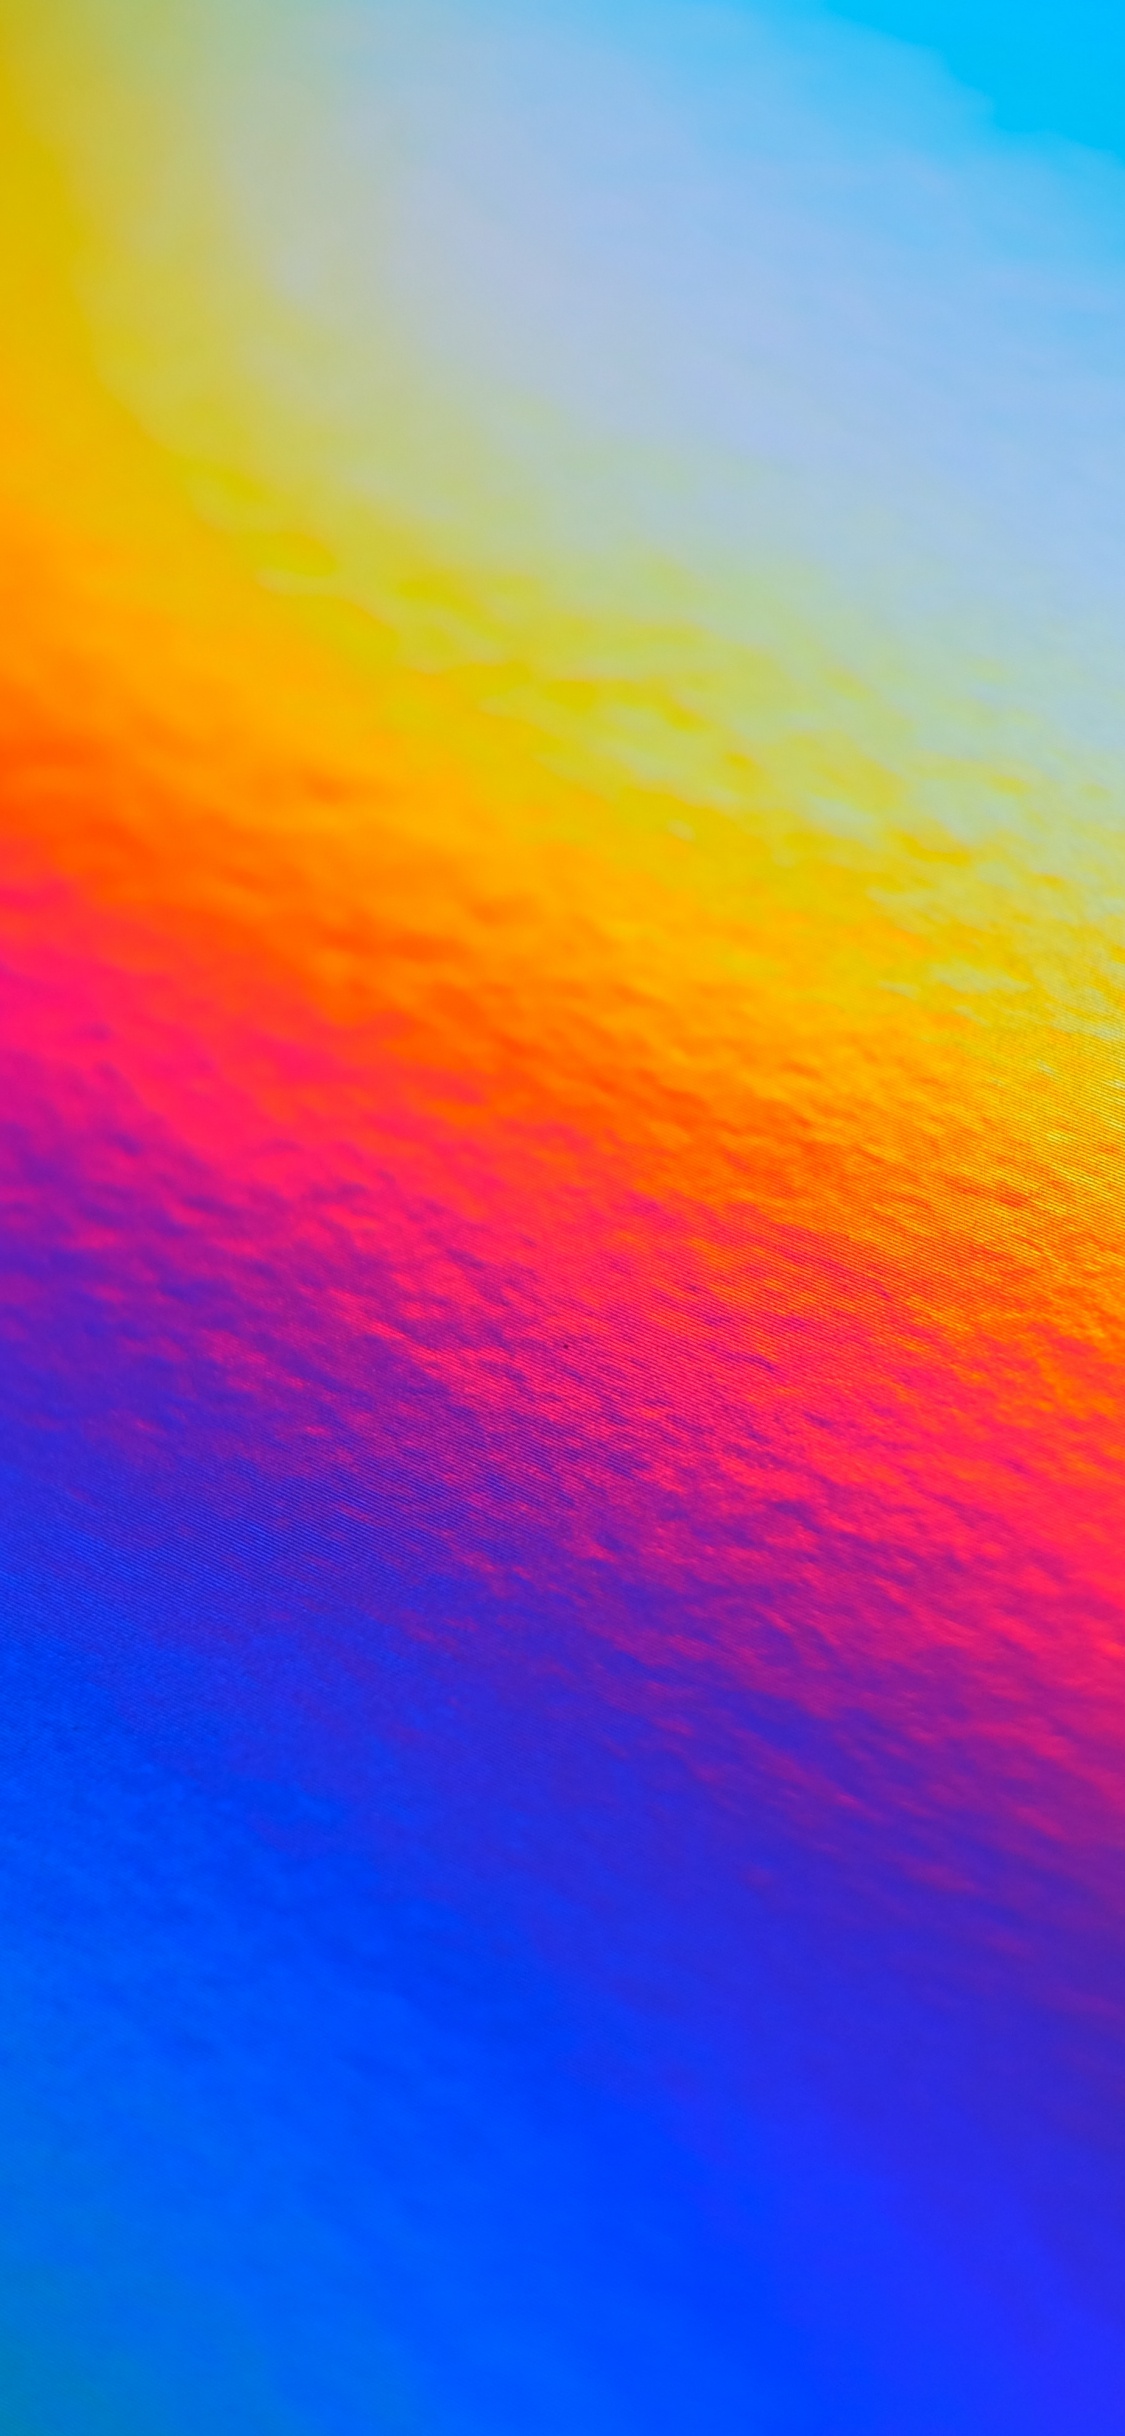 Orange and Blue Abstract Painting. Wallpaper in 1125x2436 Resolution